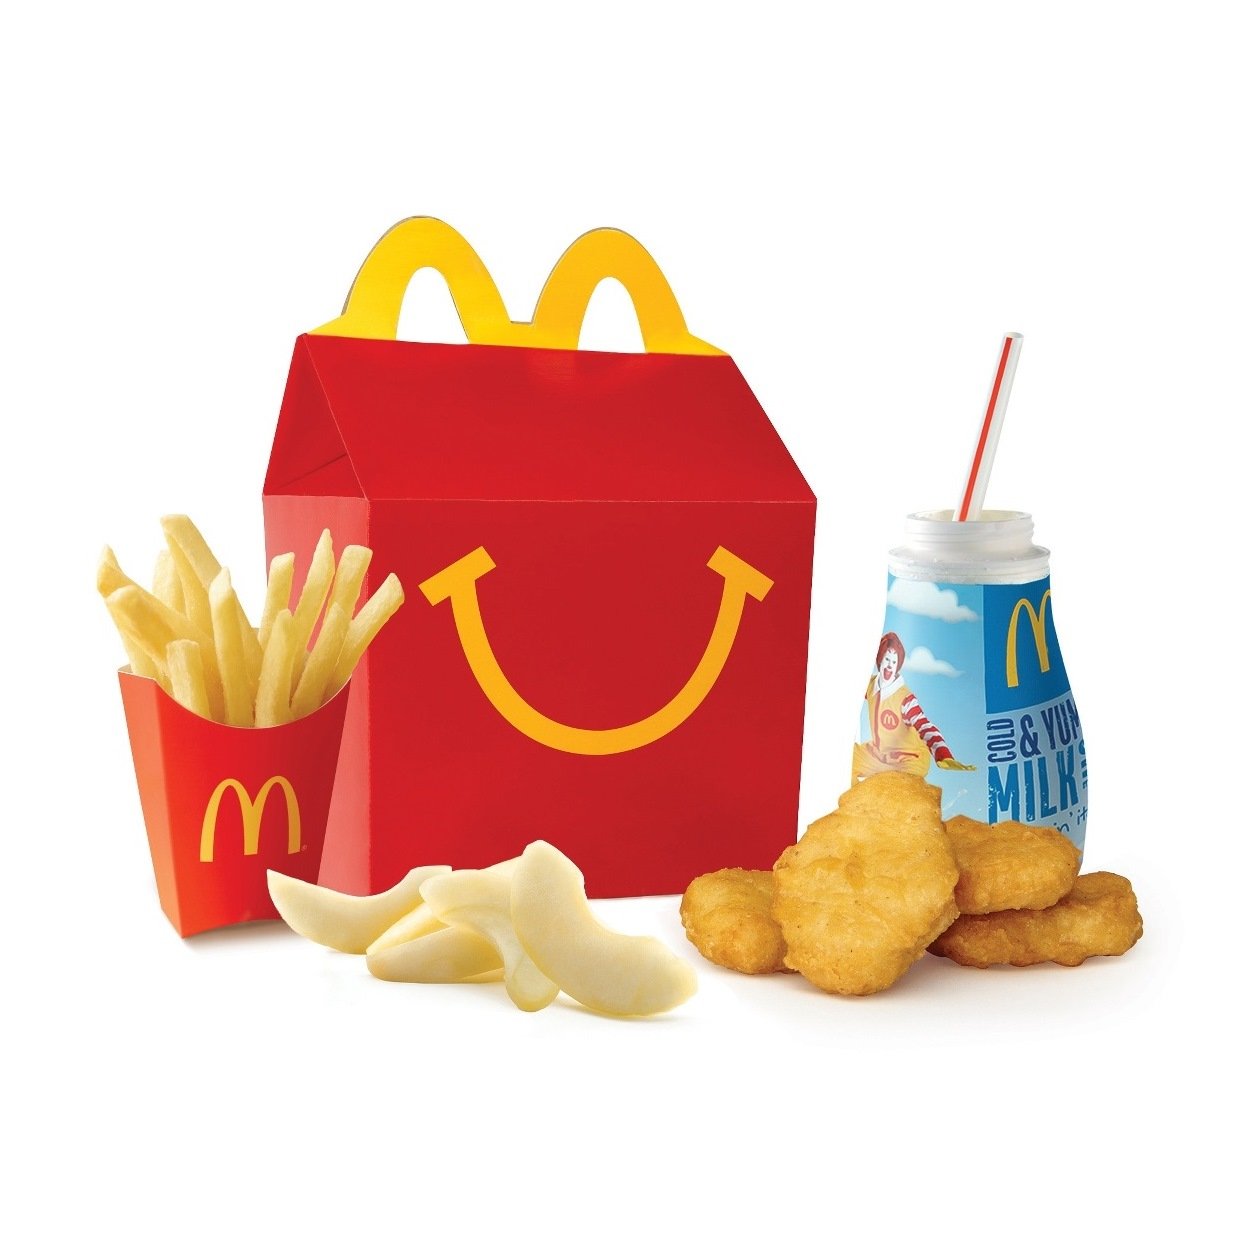 Chicken-McNugget-Happy-Meal